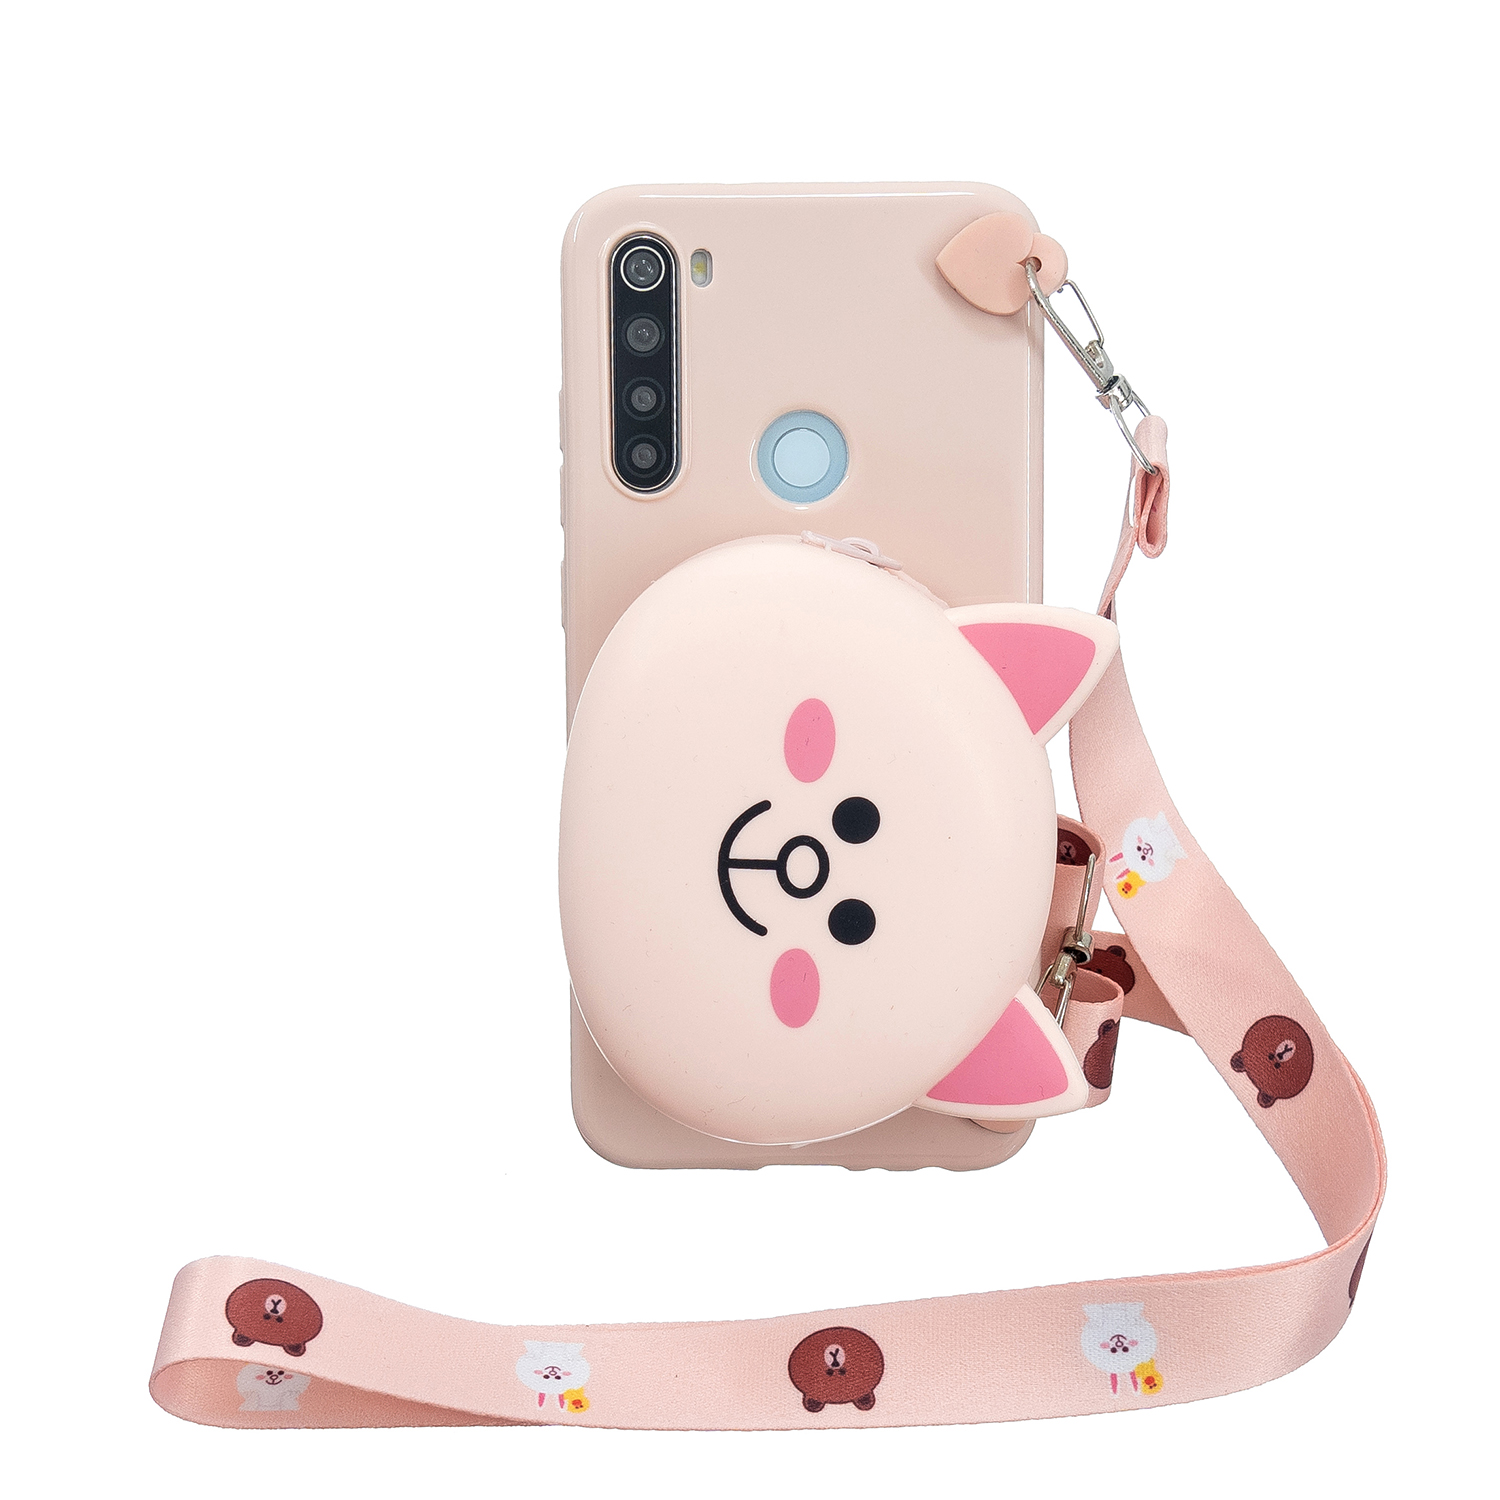 For Redmi Note 8/8T/8 Pro Cellphone Case Mobile Phone Shell Shockproof TPU Cover with Cartoon Cat Pig Panda Coin Purse Lovely Shoulder Starp  Pink